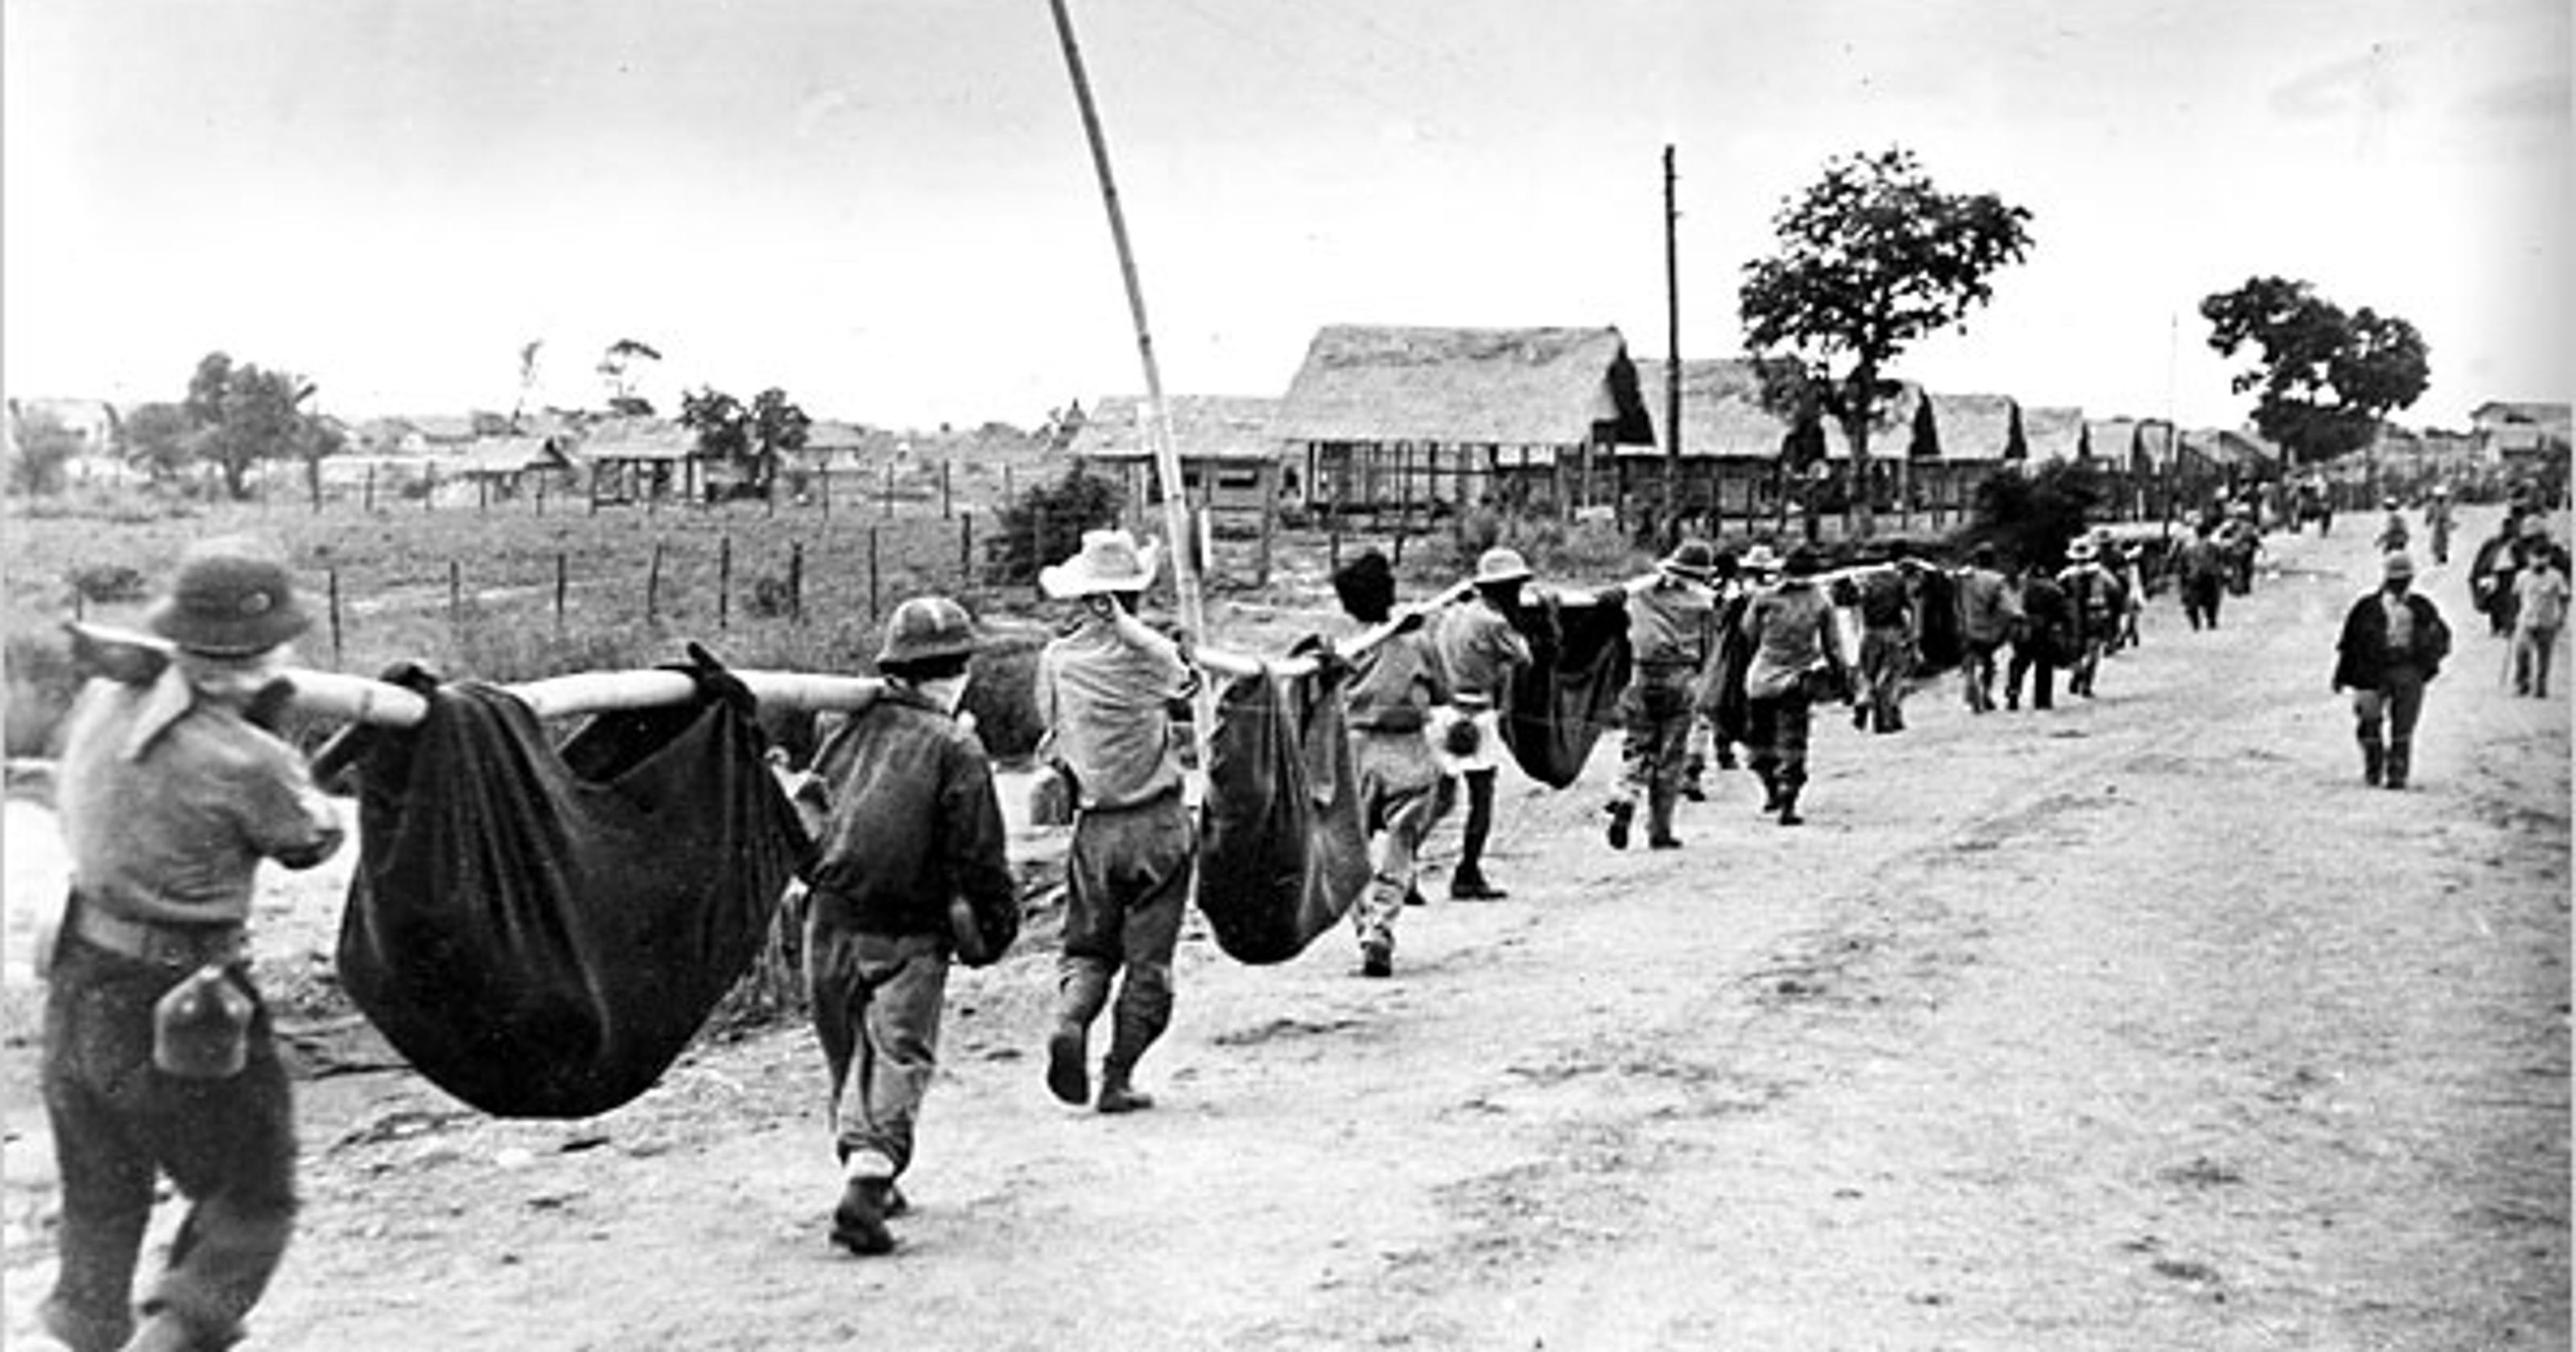 75 years ago The infamous Bataan Death March